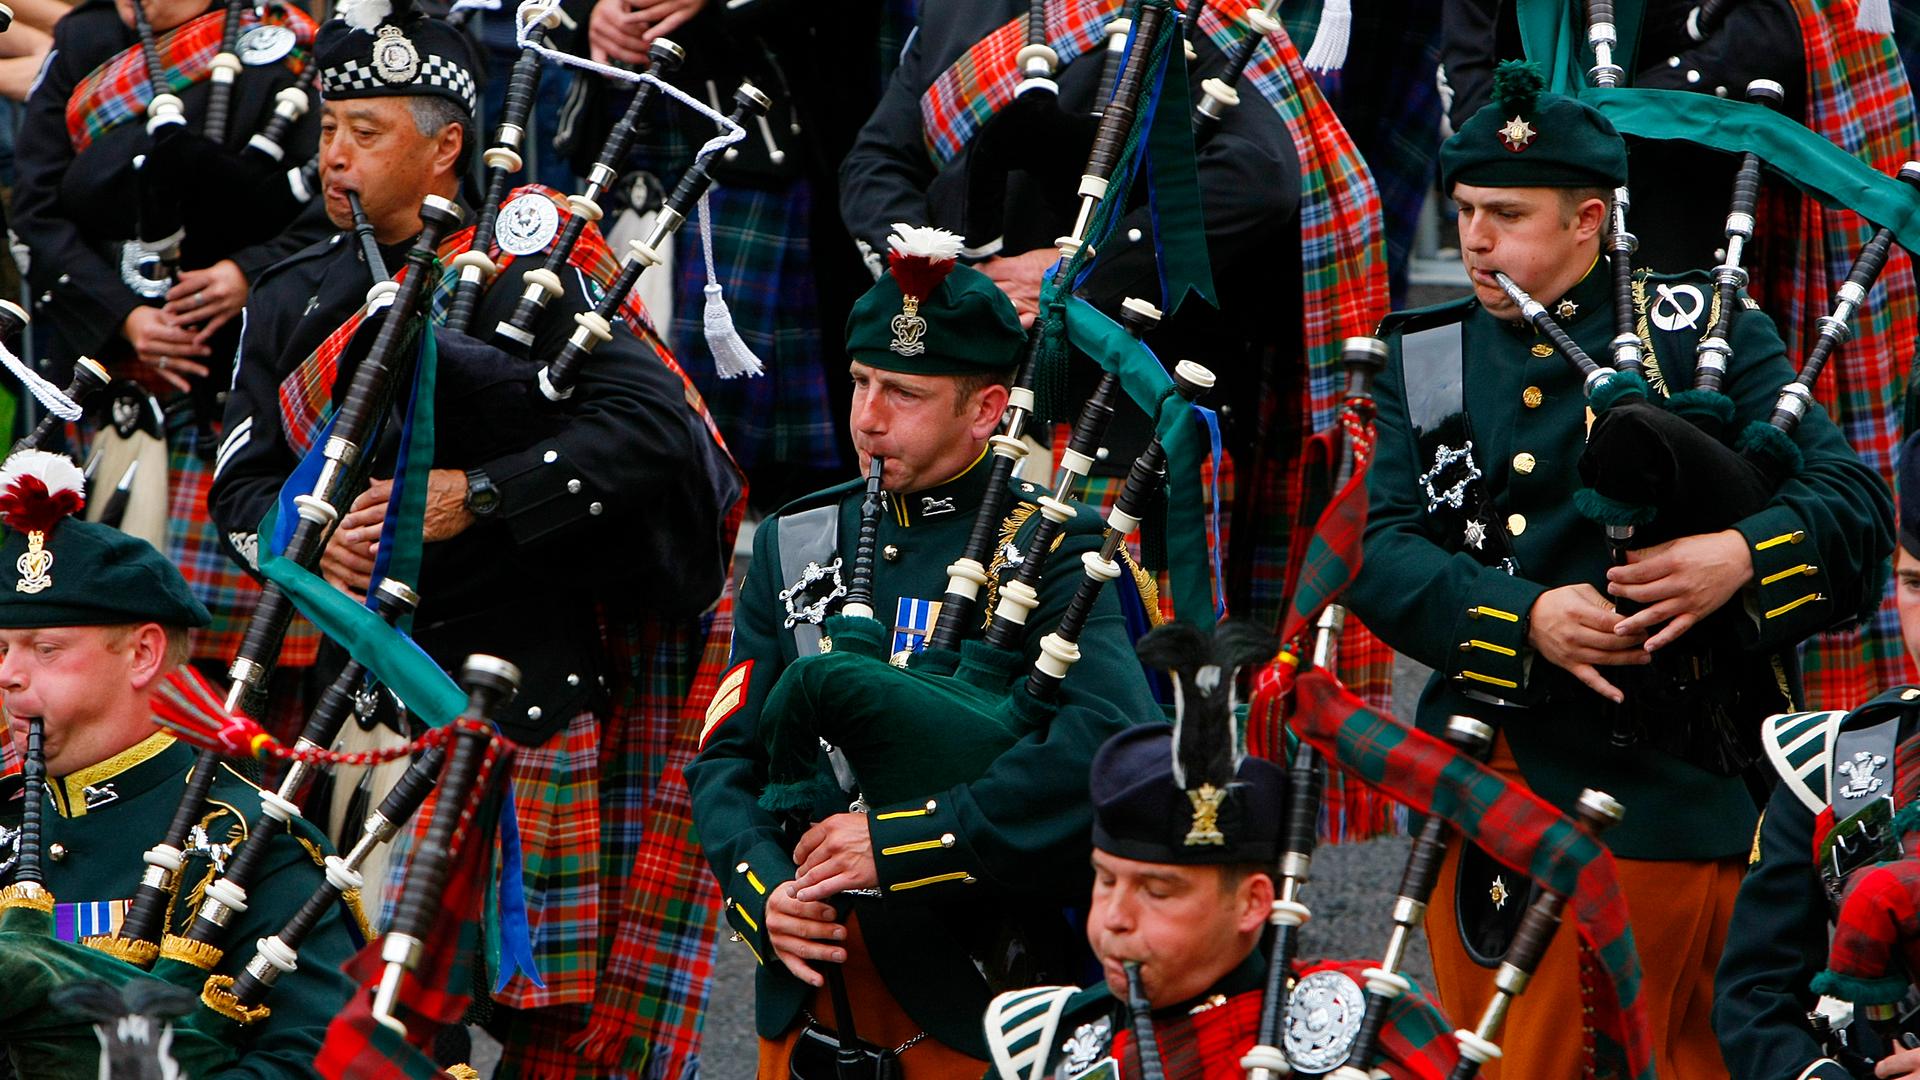 Pipers from the Edinburgh Military Tattoo Massed Pipes and Drums perform during the Edinburgh Fringe Festival parade in Holyrood Park in Edinburgh, Scotland.